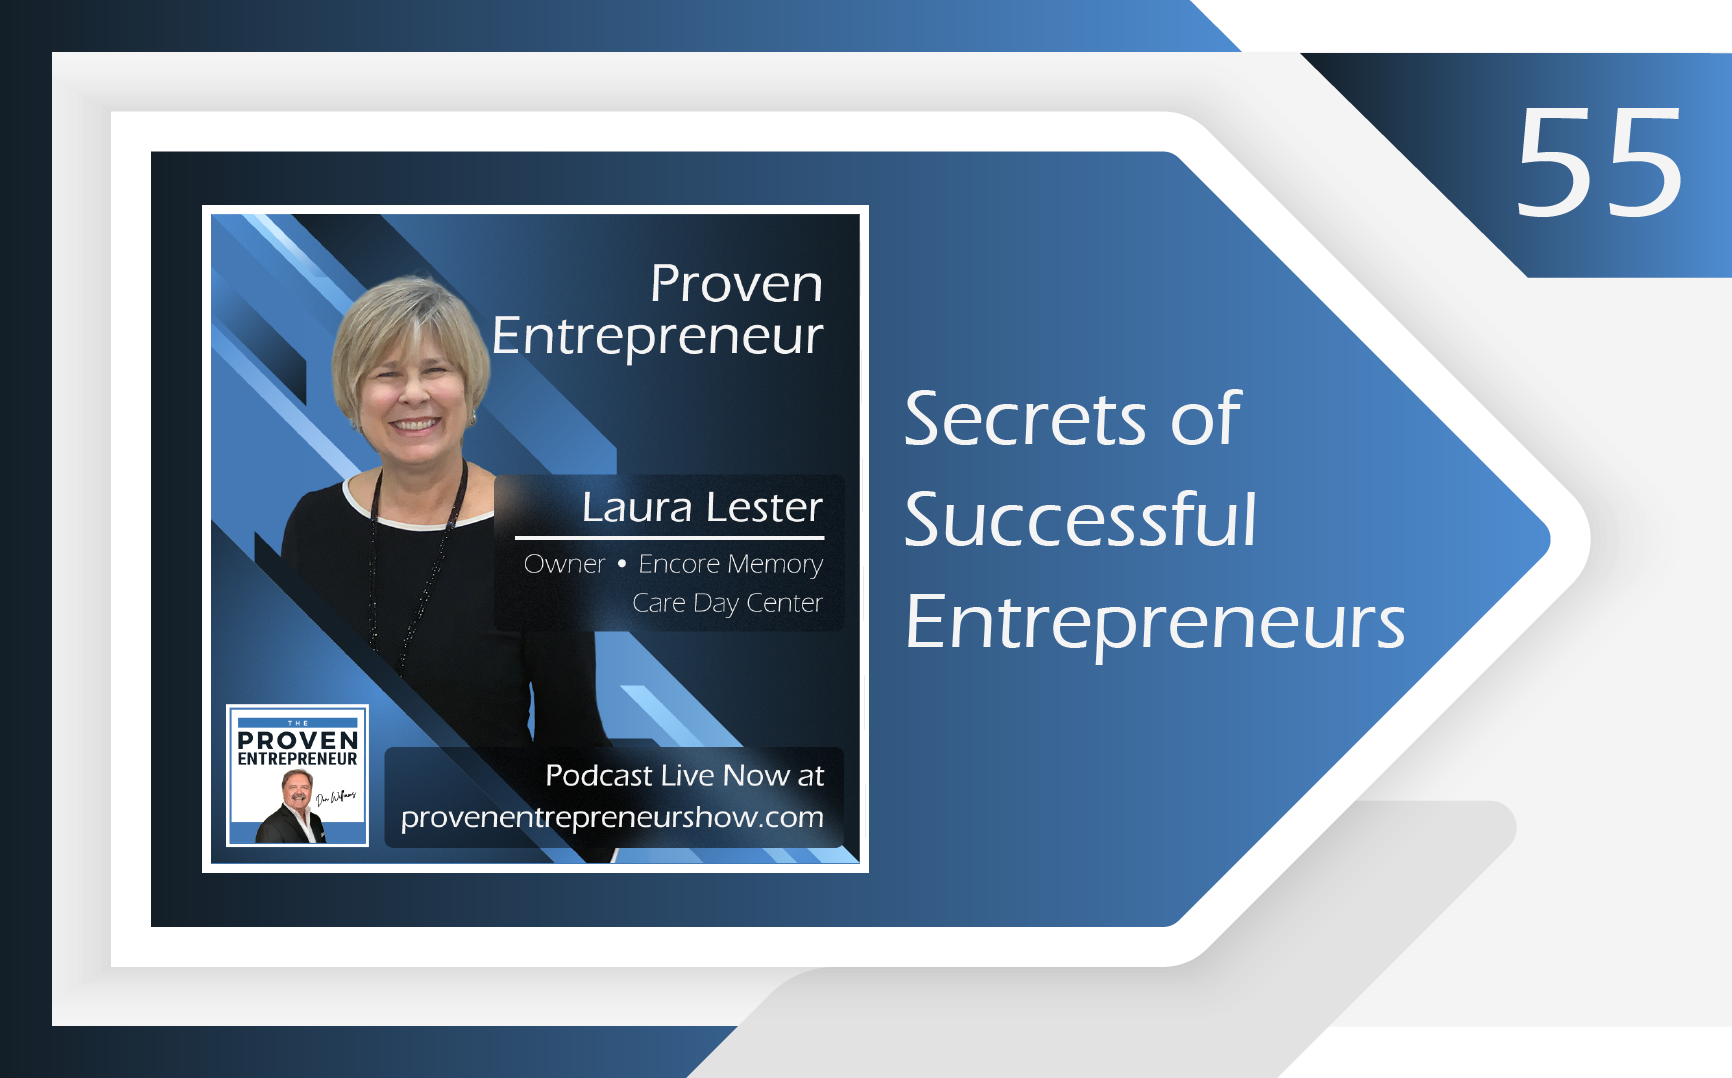 E55 | Laura Lester Knows the Value of Perseverance